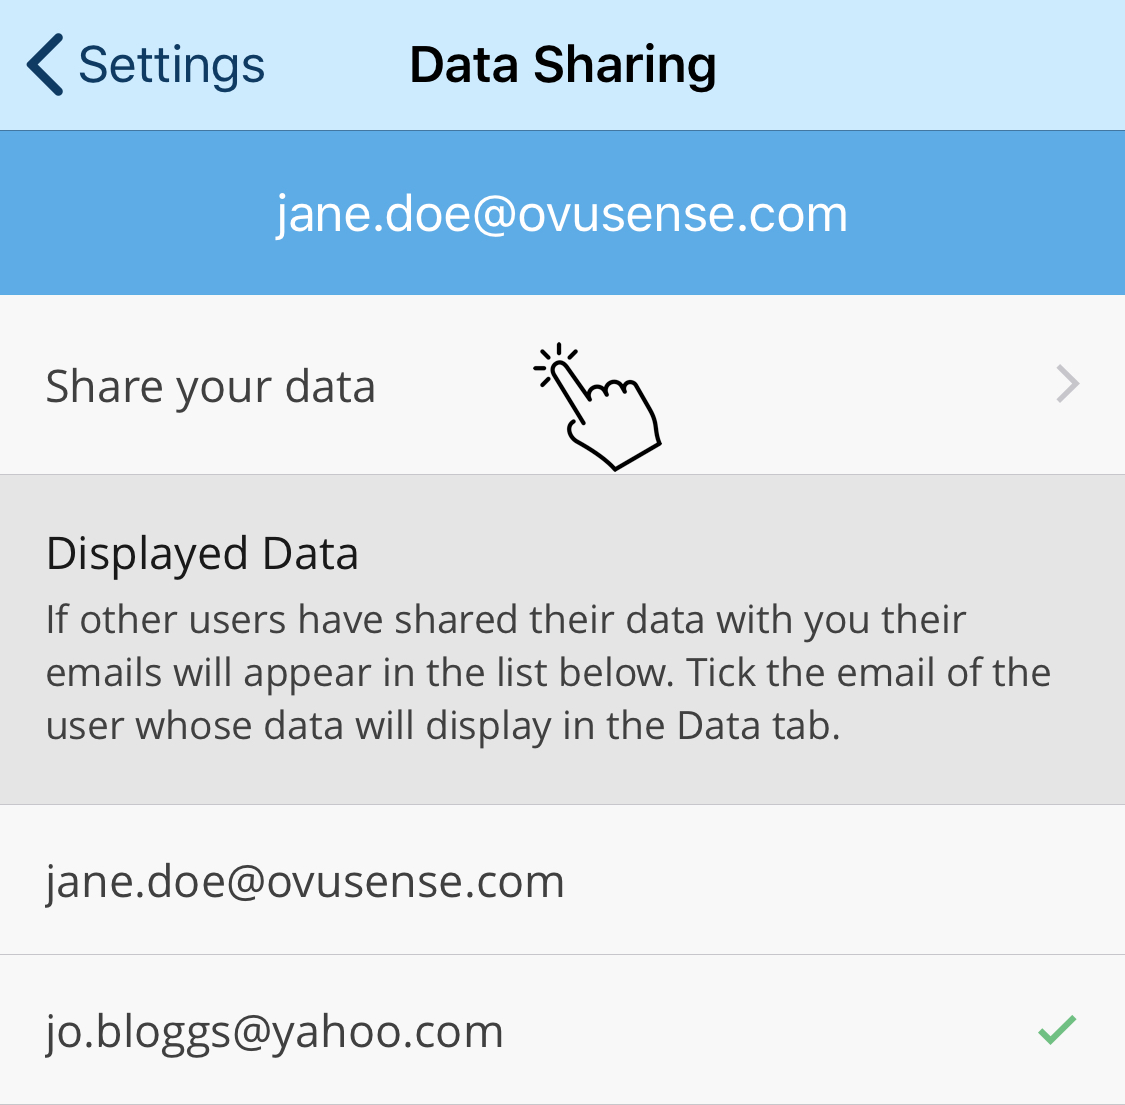 Tap on Share your data